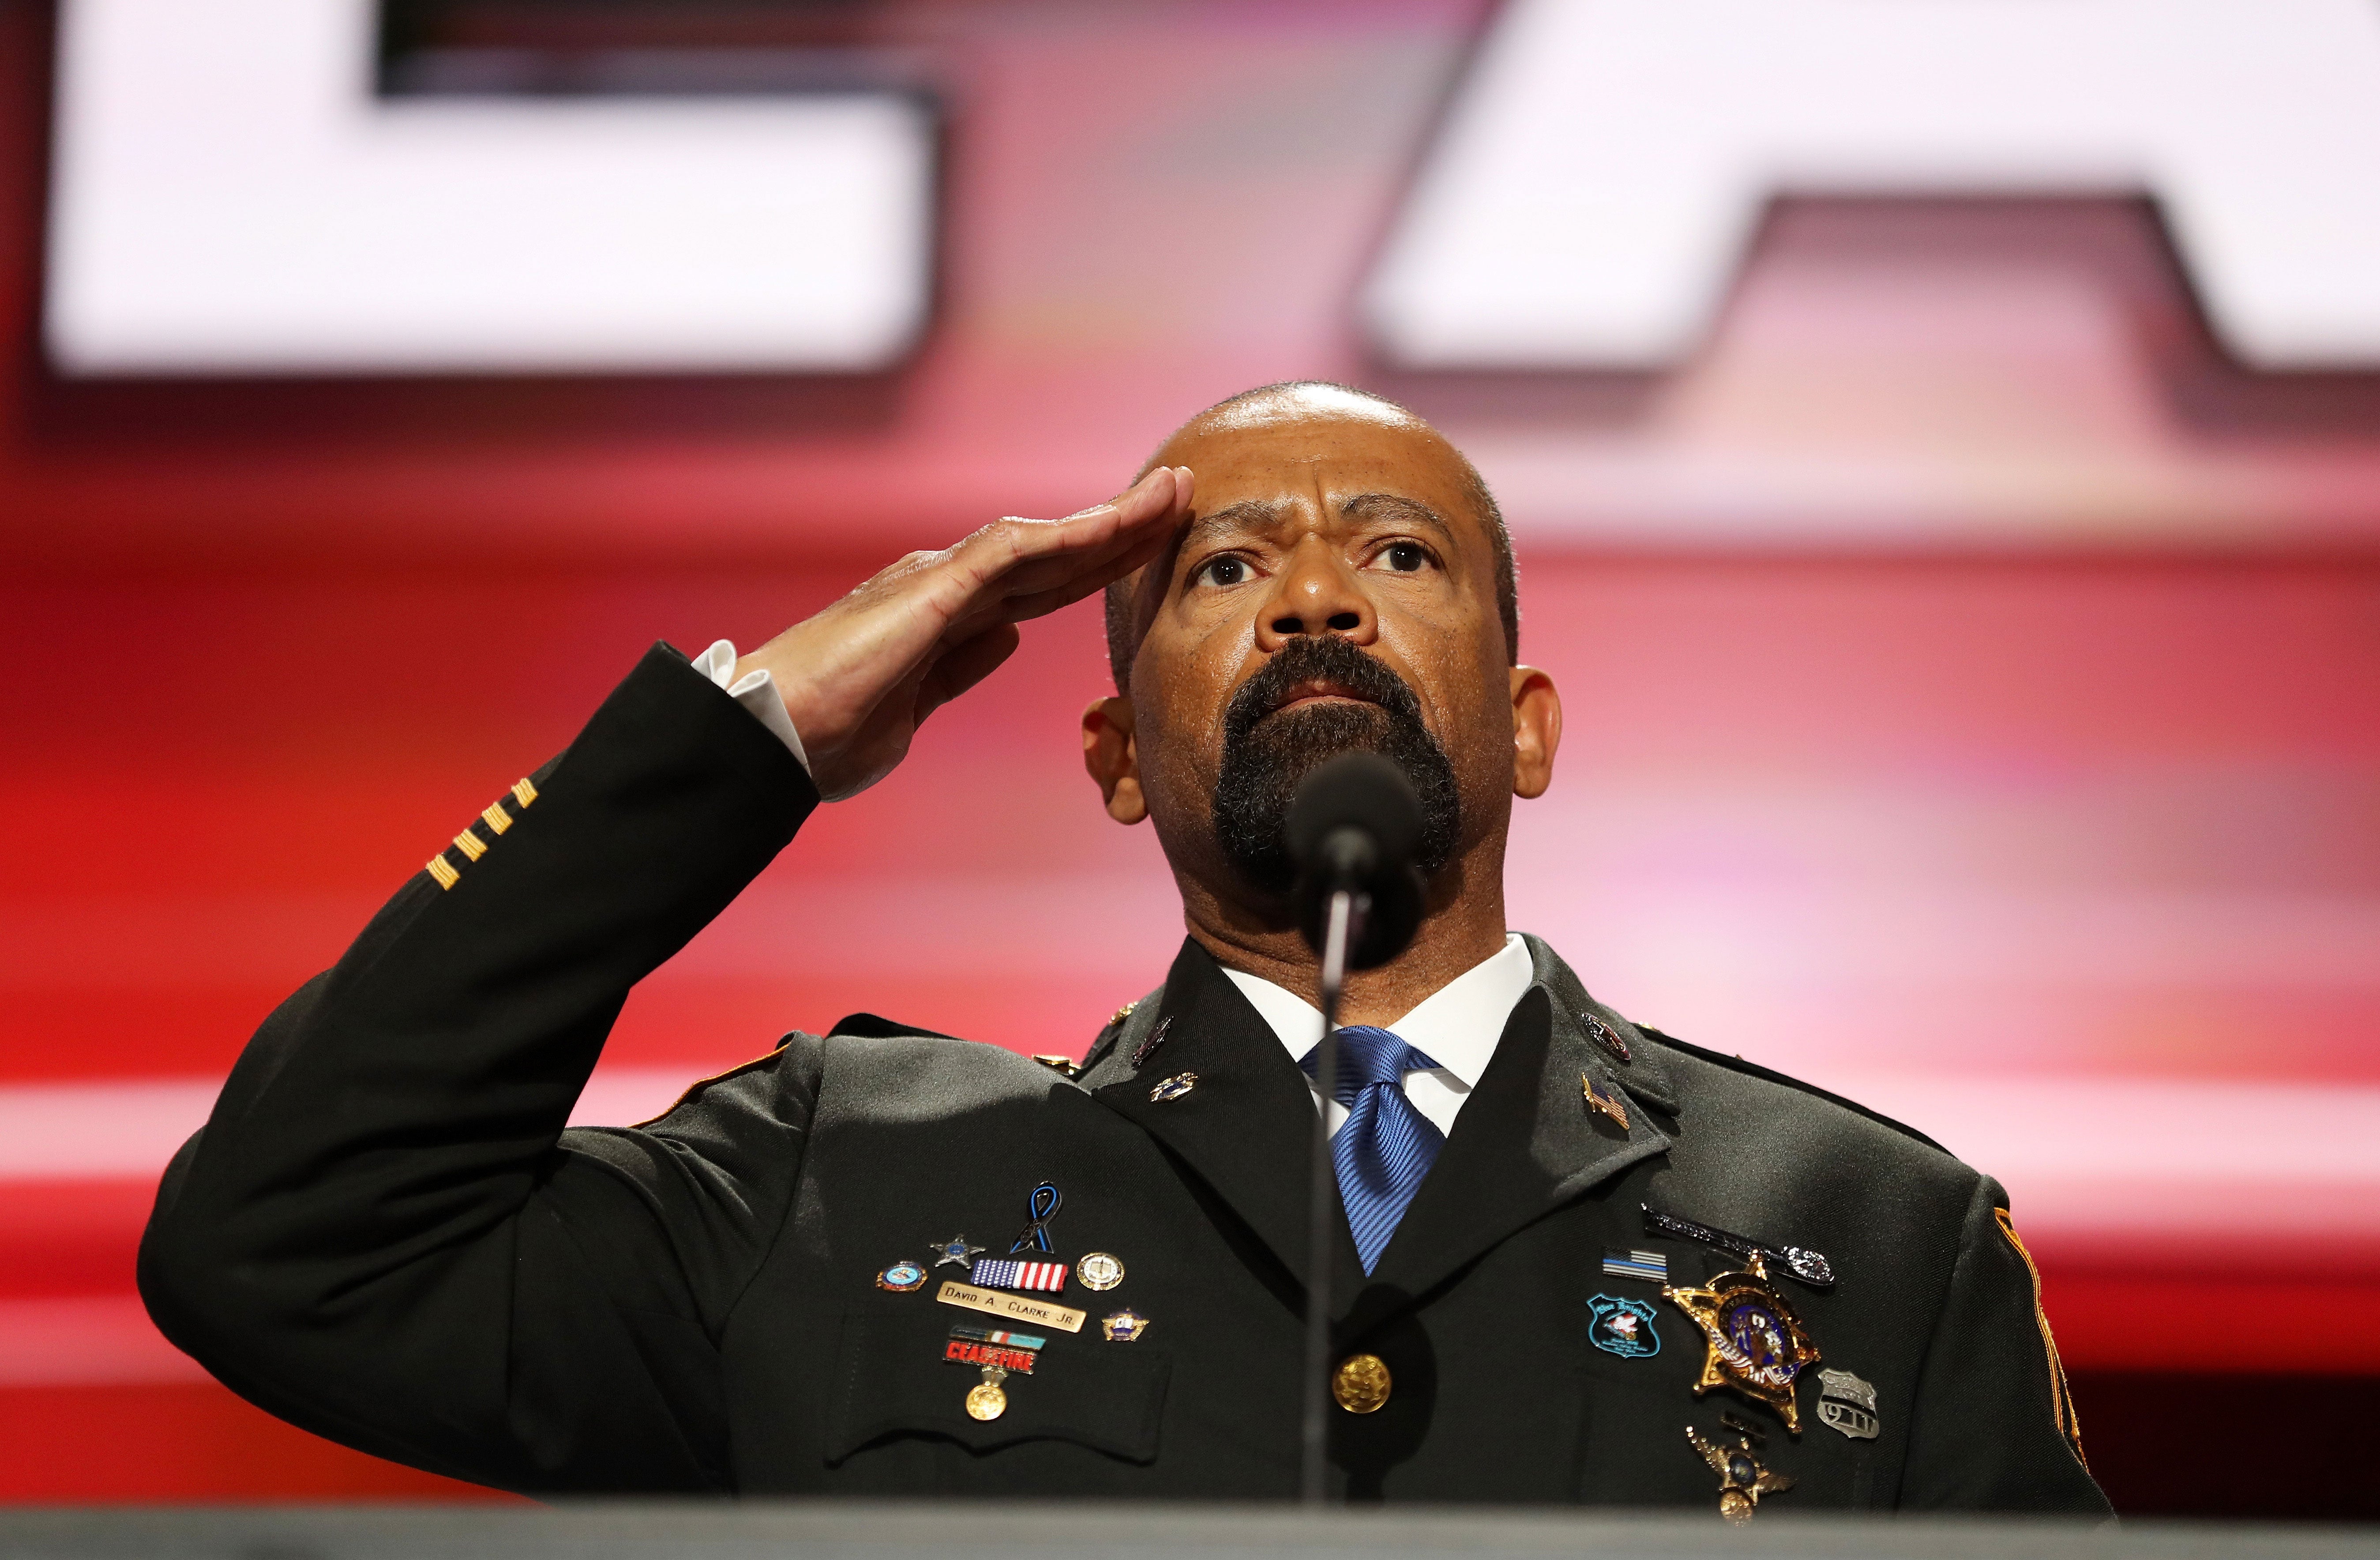 Black Sheriff at RNC Says Acquittal in Freddie Gray Case is ’Good News’
